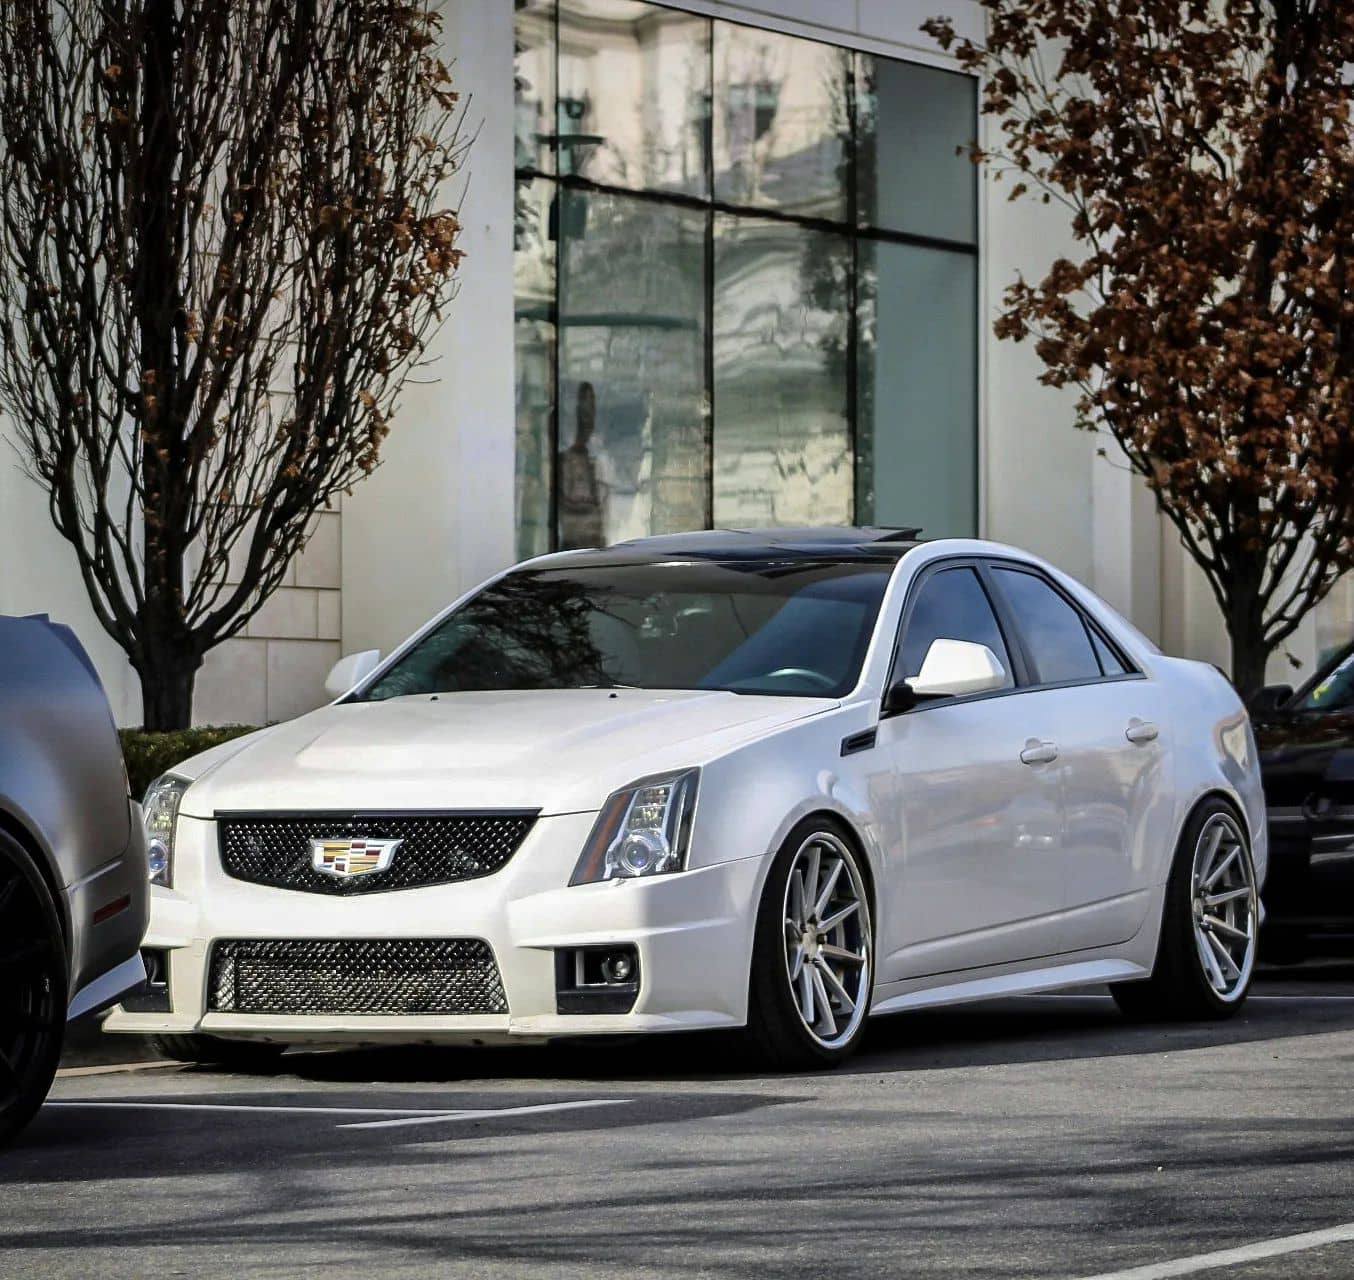 Stanced Cadillac CTS-V on Ferrada FR4 wheels, 20x9 with 245 tires up front and 20x10.5 with 285 tires in the rear